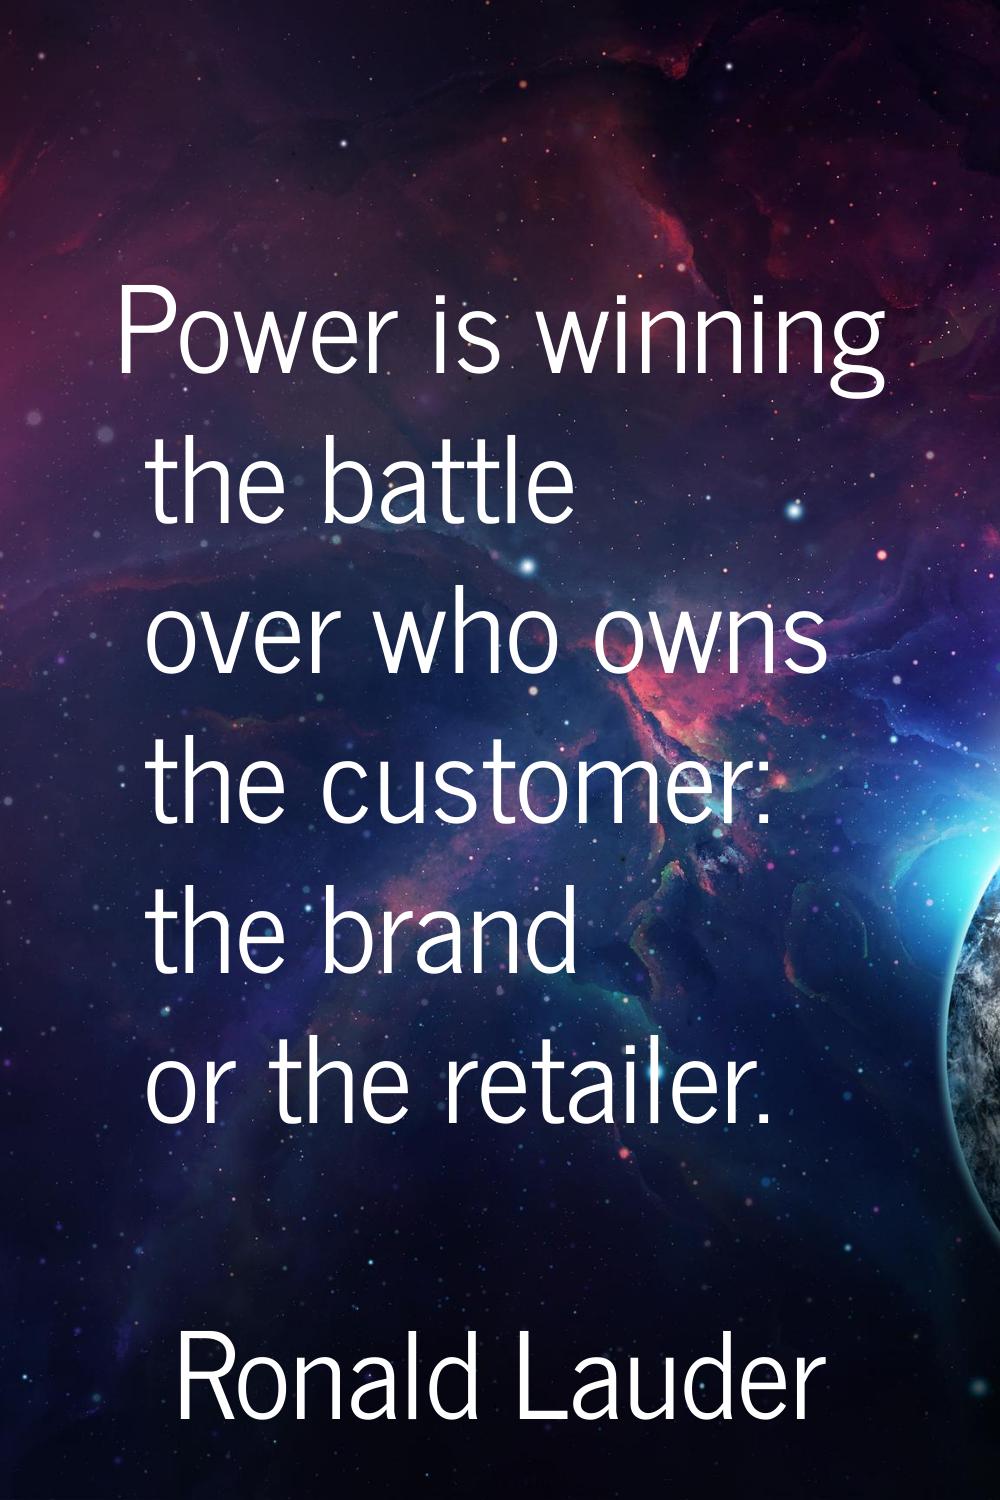 Power is winning the battle over who owns the customer: the brand or the retailer.